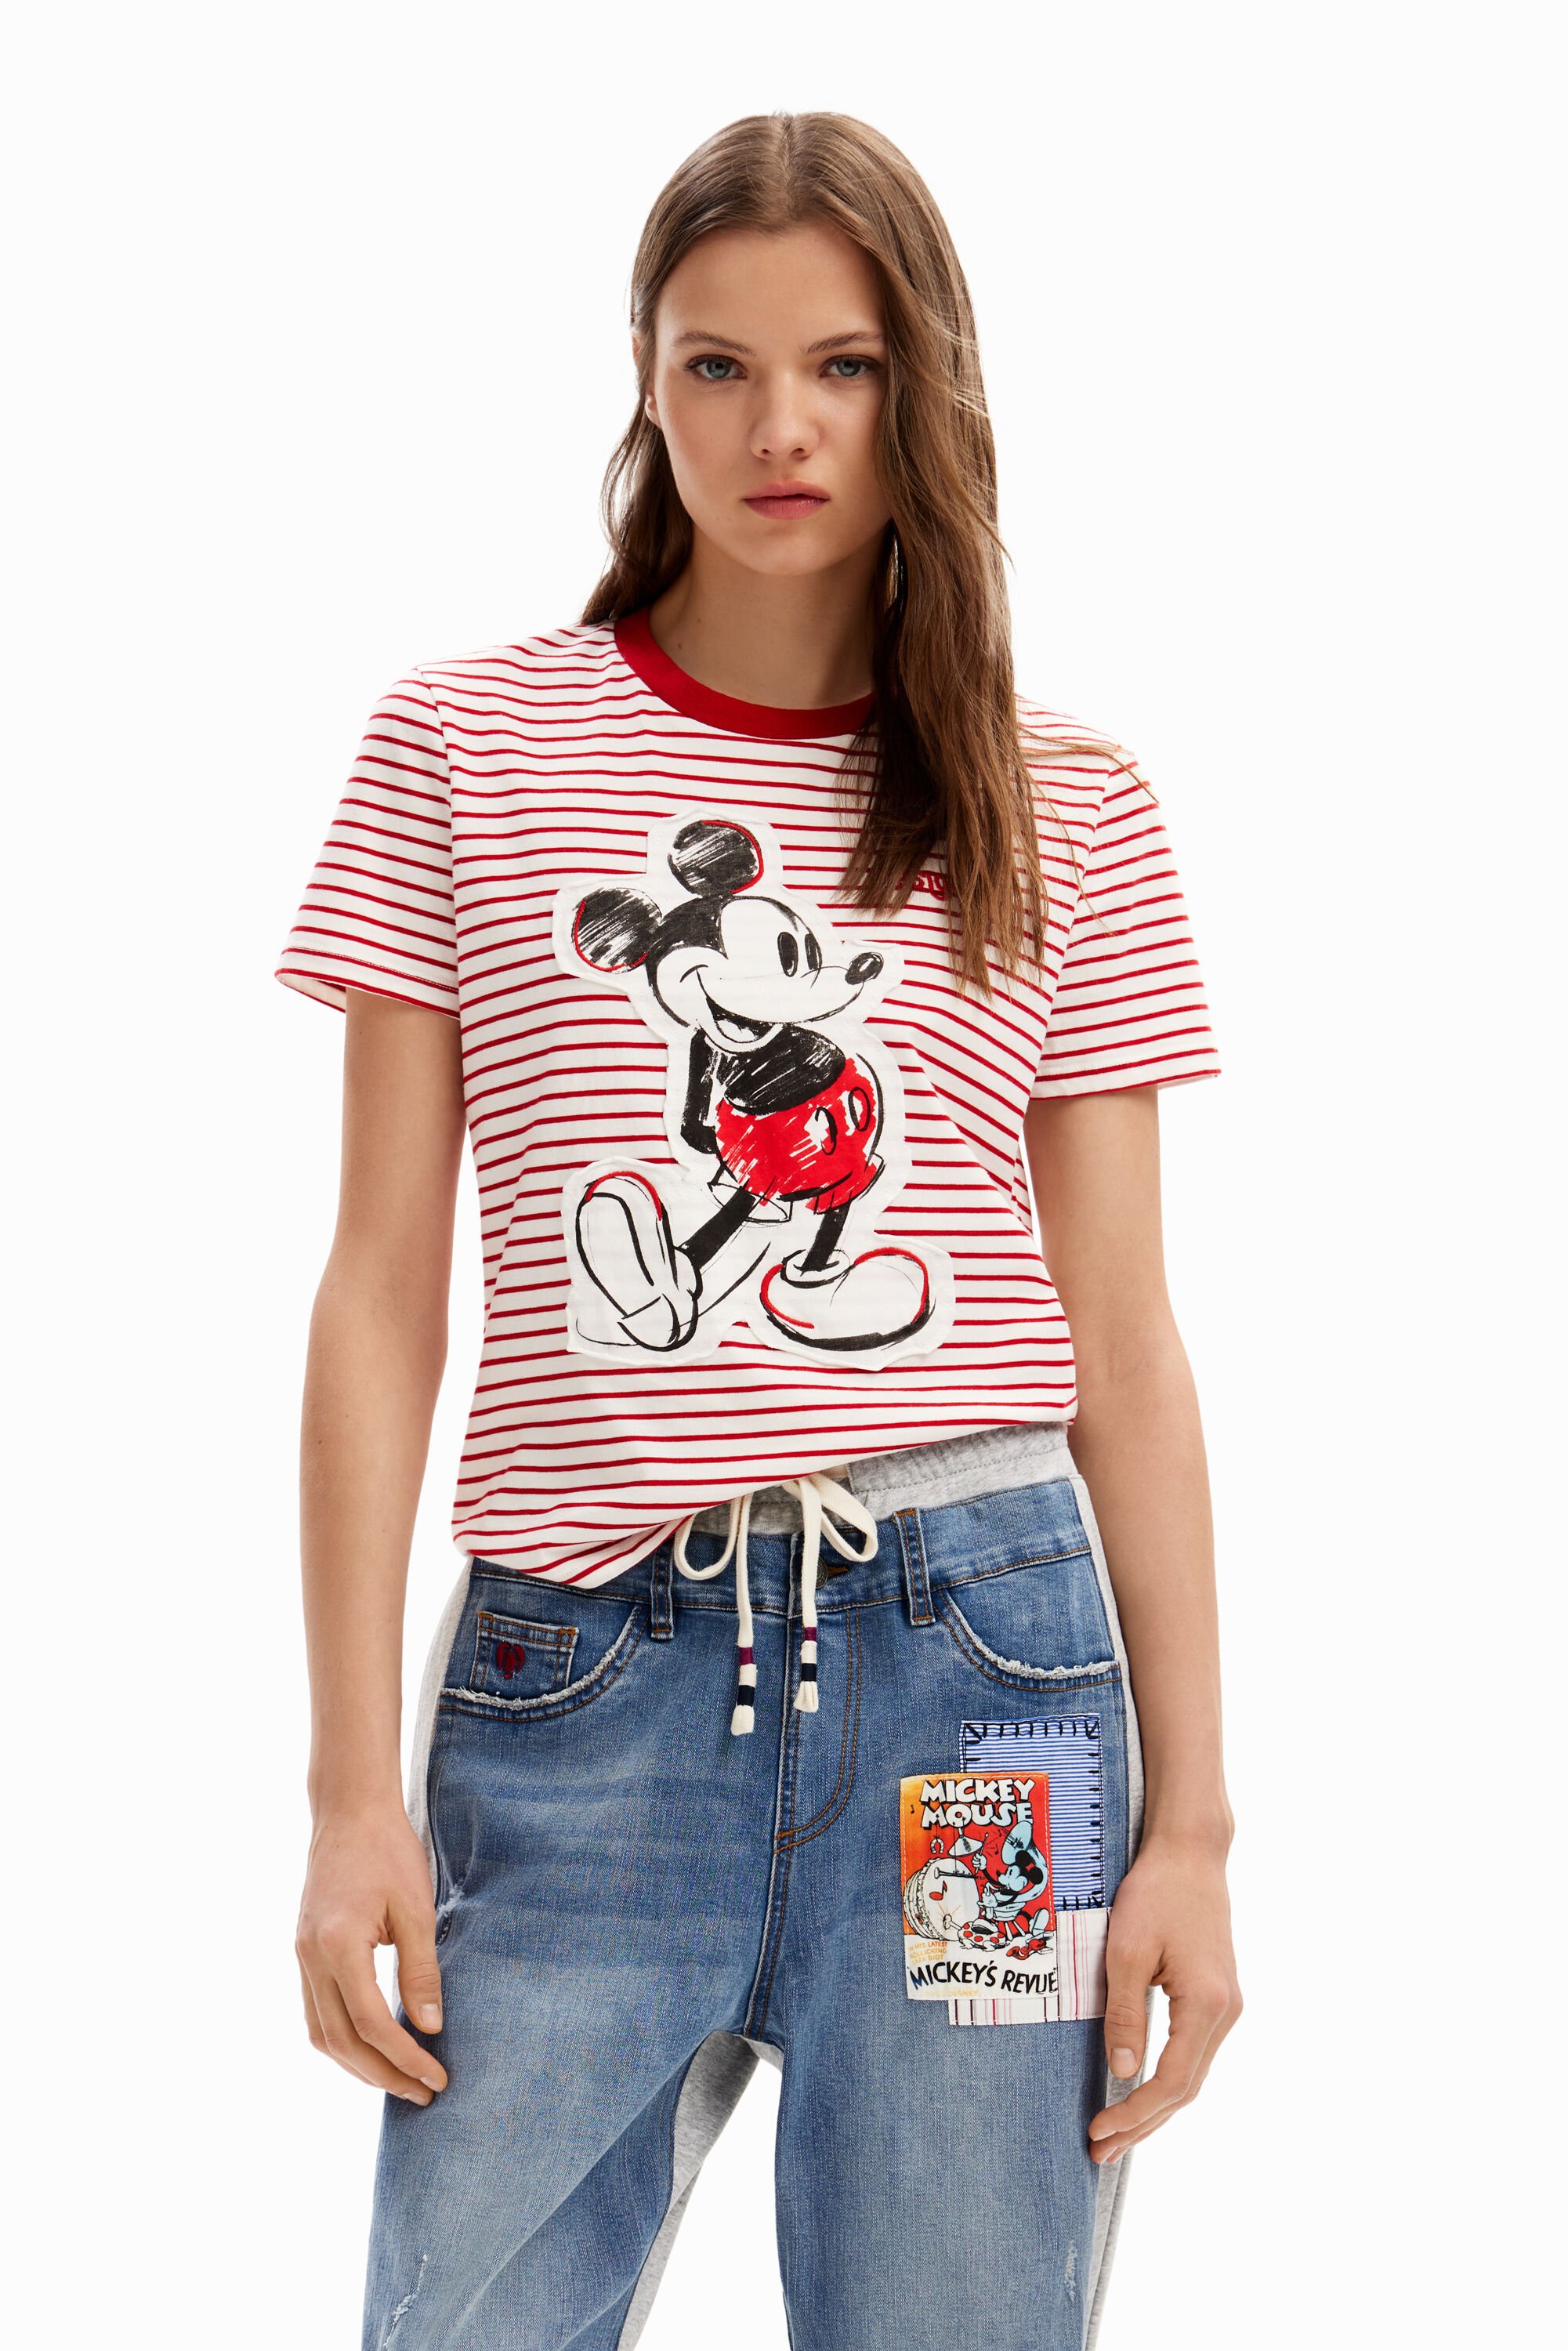 Desigual Striped Mickey Mouse T-shirt